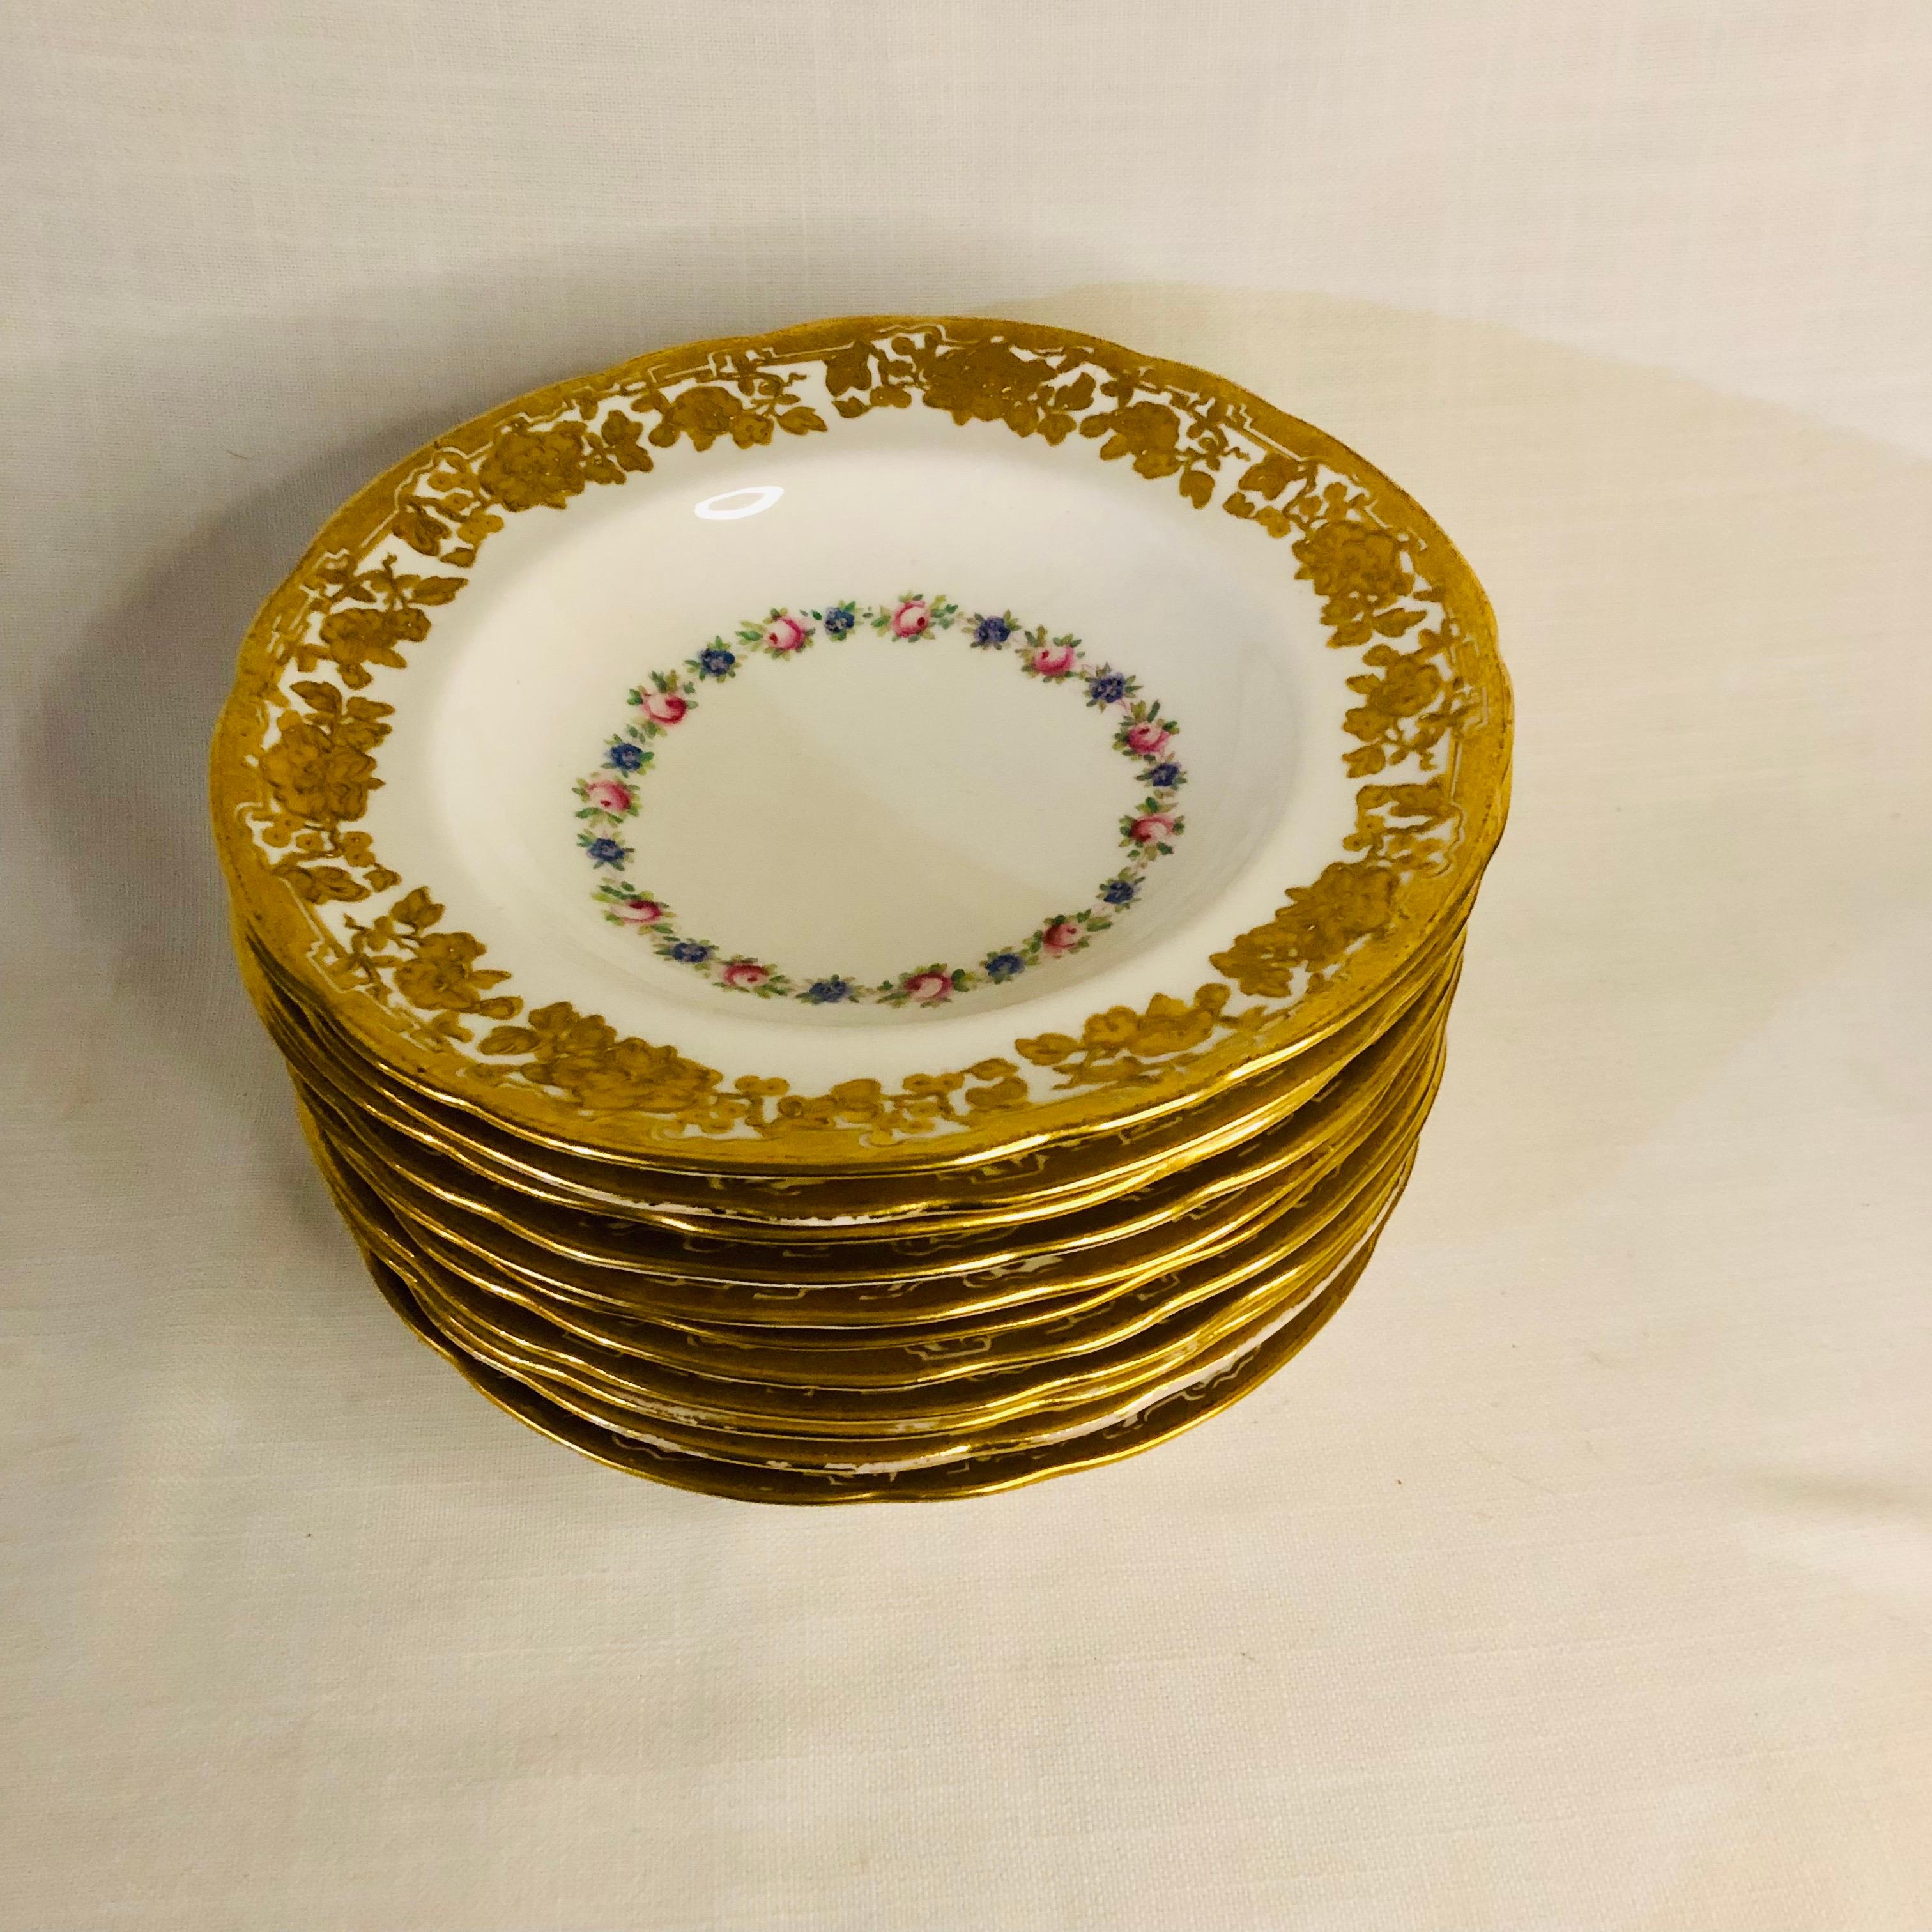 English Set of Eleven Hammersley & Co. Wide Rim Soups with Raised Gilded Flowers on Rim For Sale